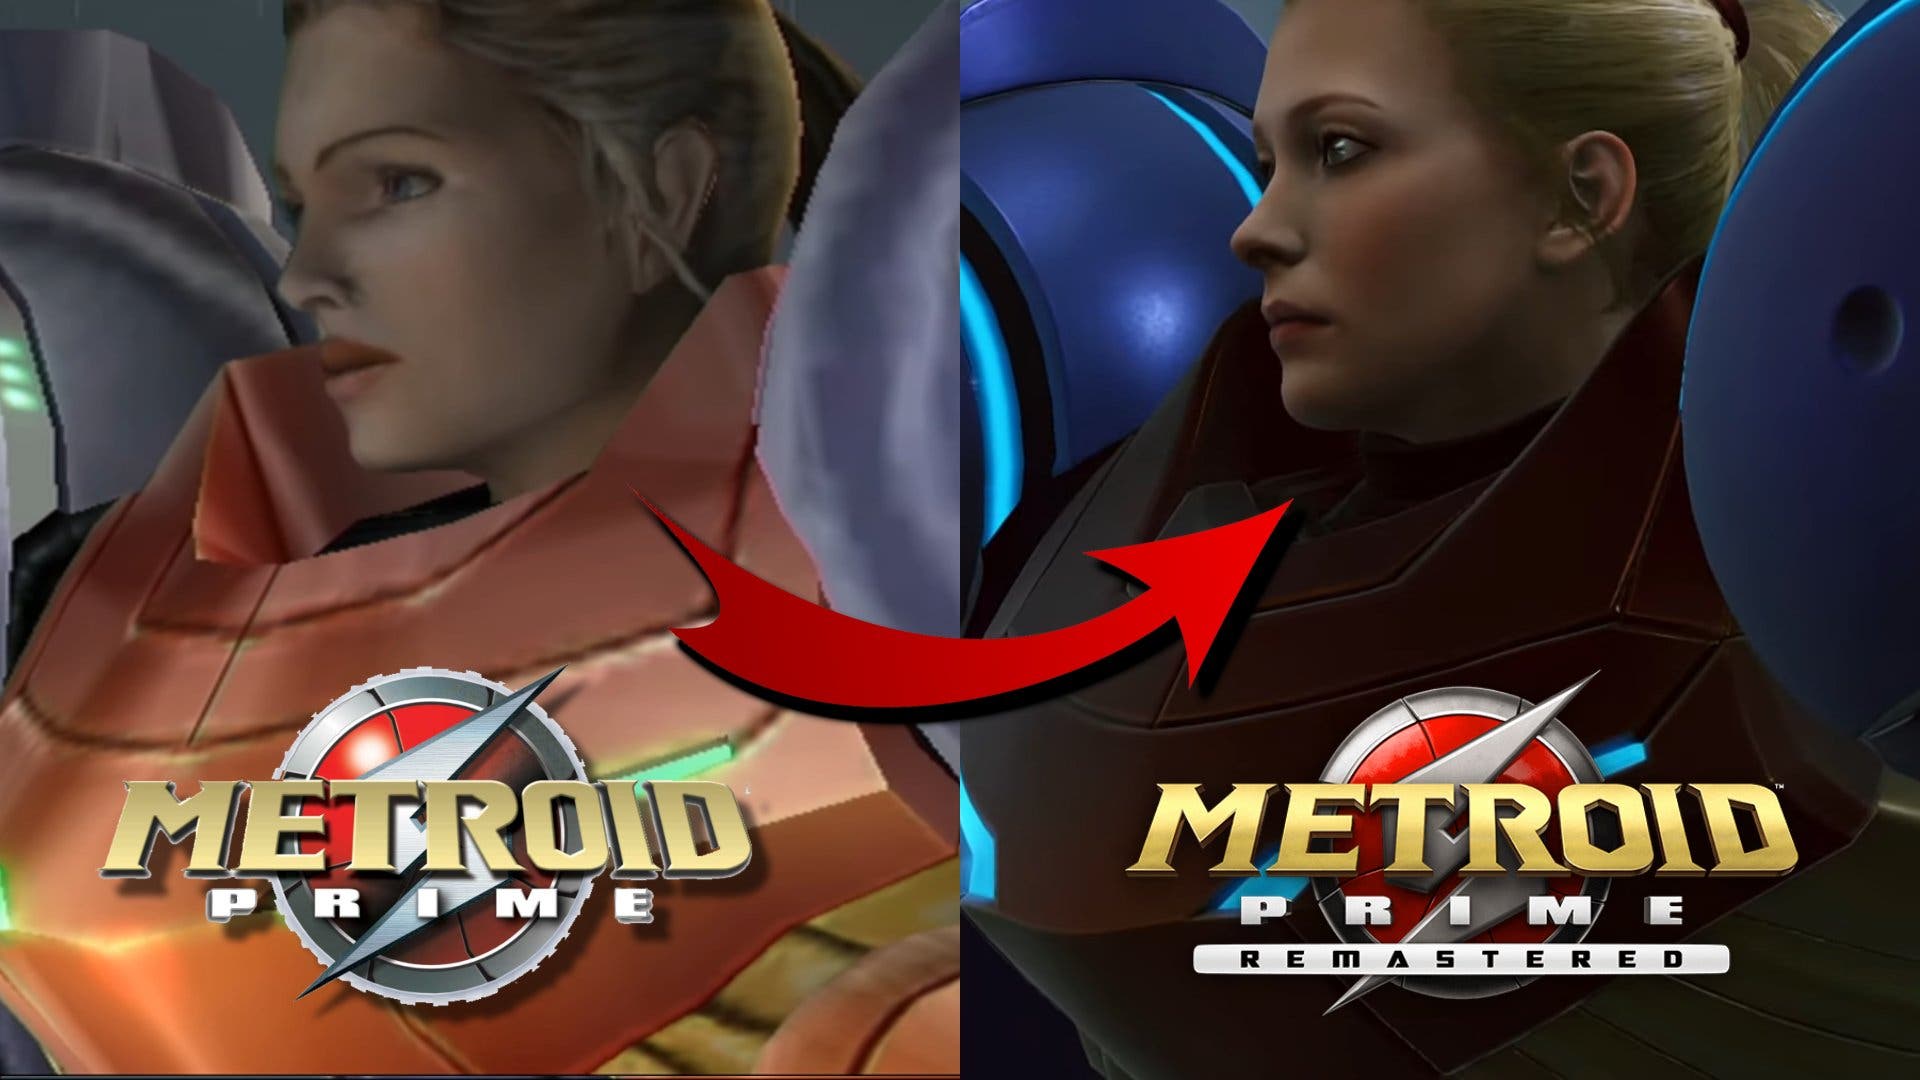 Metroid Prime Remastered: The Hottest Collection of Samus Aran Yet!